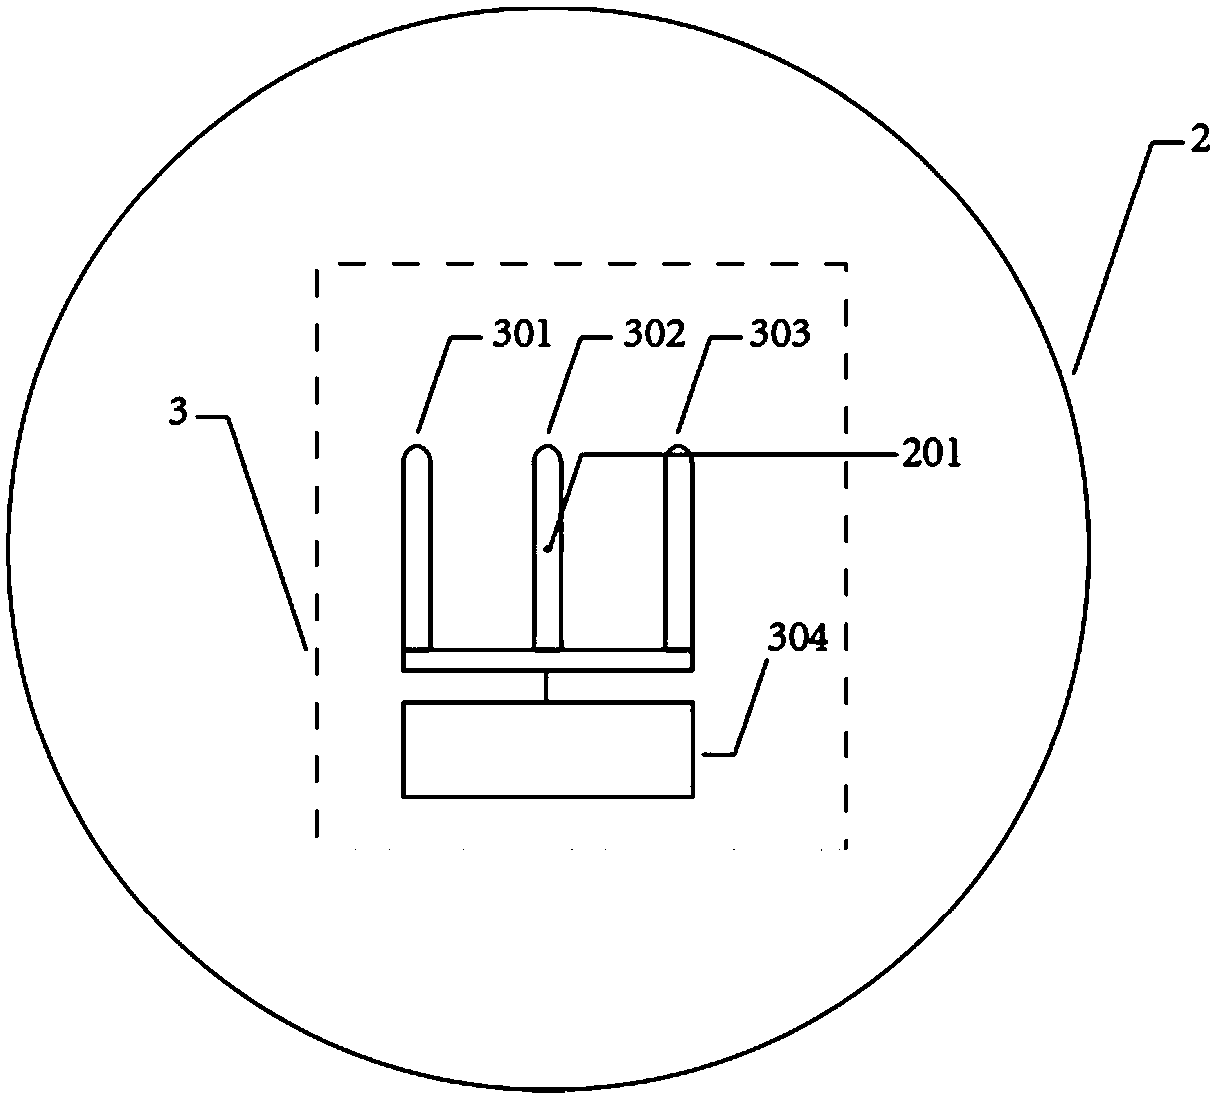 Long-distance small displacement detecting method based on microwave signals